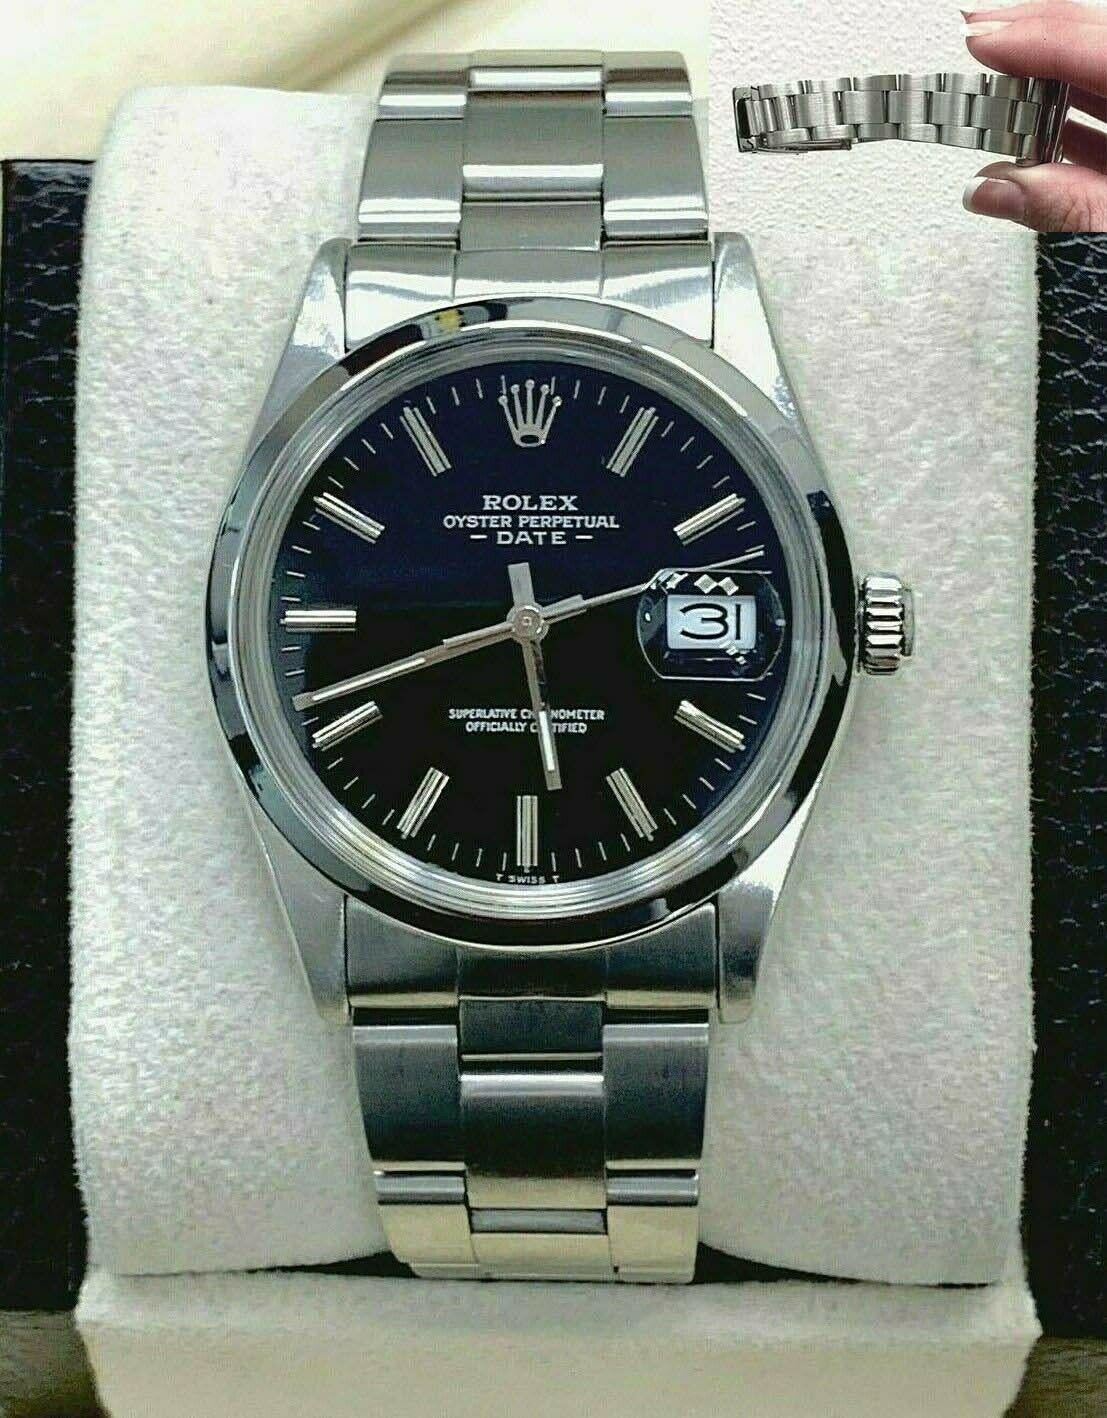 Style Number: 15000 

 

Serial: 7071***

 

Model: Date

 

Case Material: Stainless Steel

 

Band: Stainless Steel

 

Bezel:  Stainless Steel

 

Dial: Black

 

Face: Acrylic 

 

Case Size: 34mm

 

Includes: 

-Elegant Watch Box

-Certified